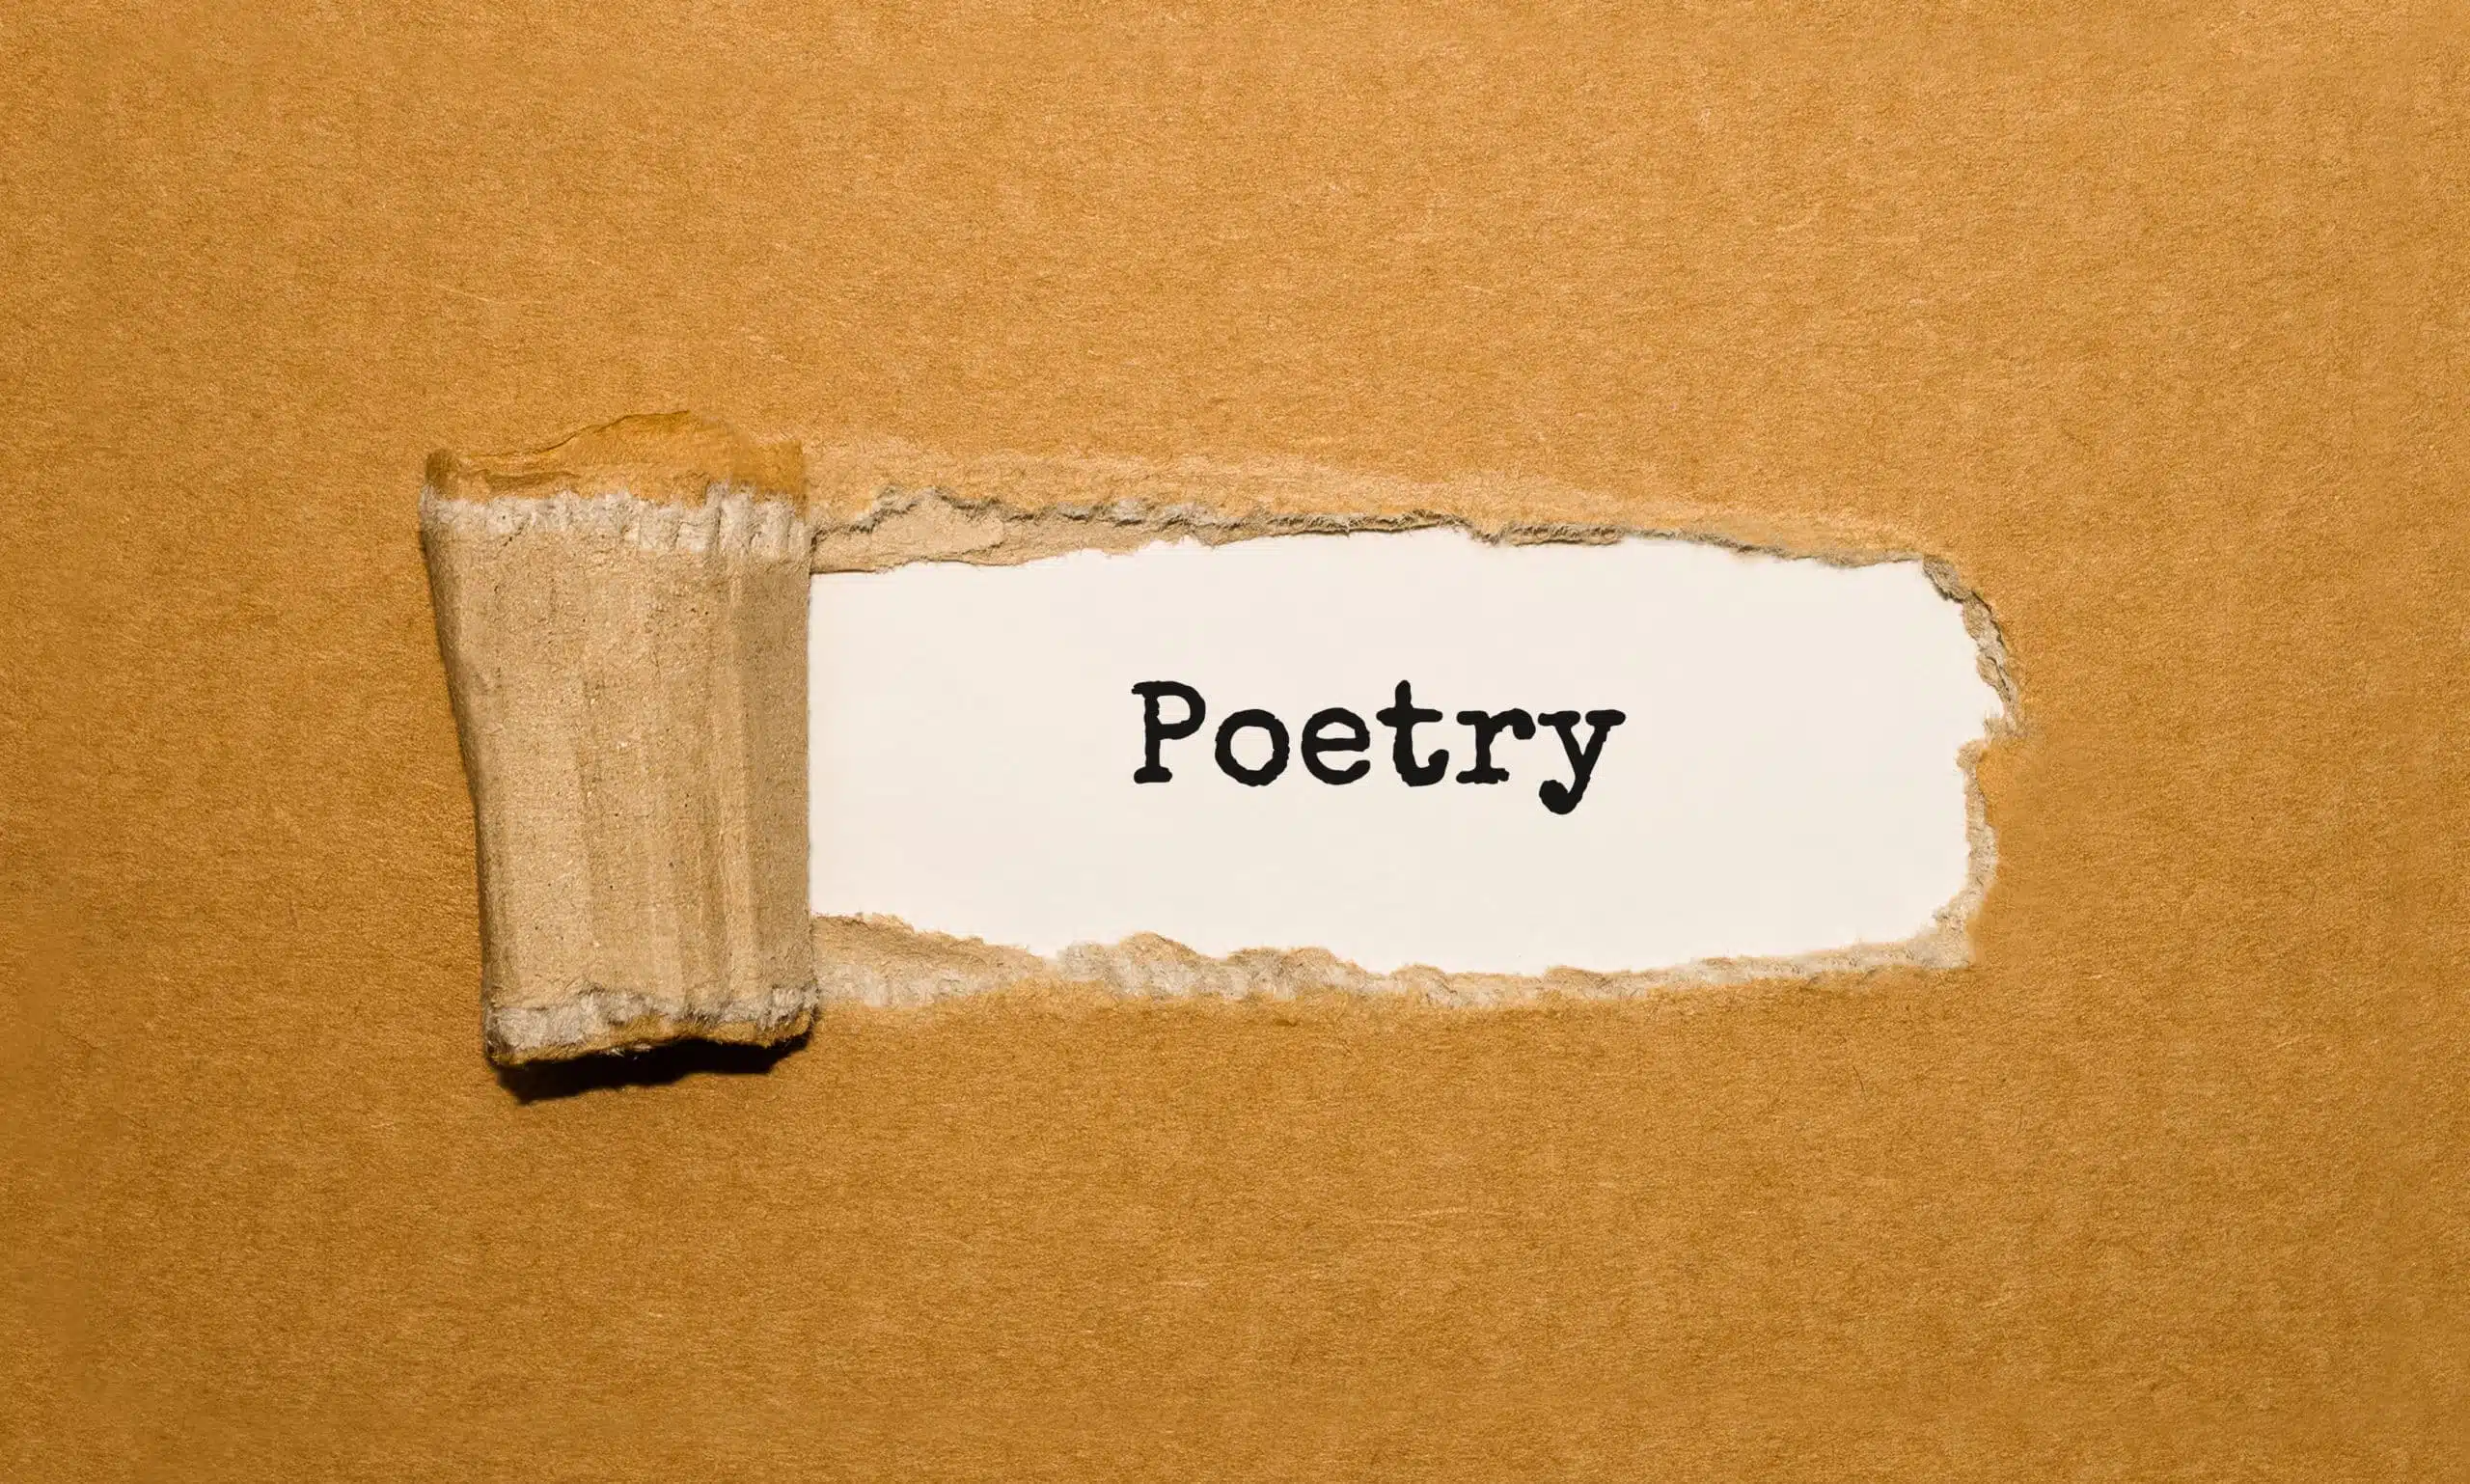 The text "Poetry" appearing behind the torn brown paper.